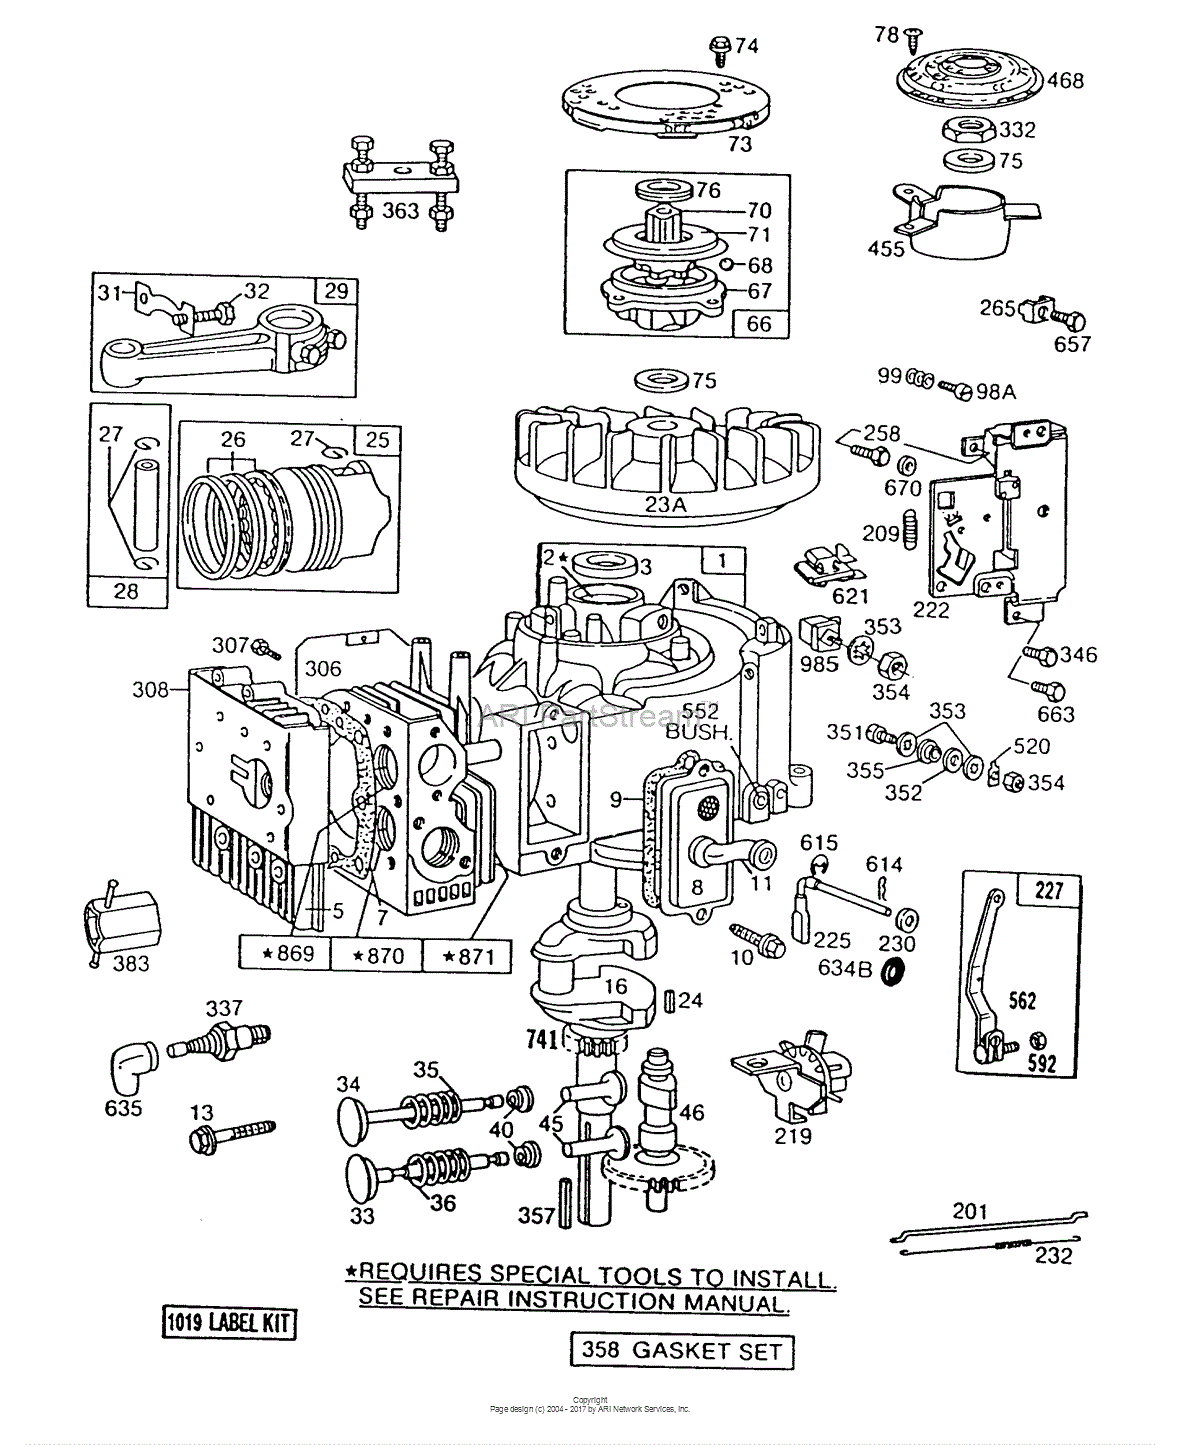 18 Hp Briggs And Stratton Engine Diagram 2007 Tacoma Fuse Box Map Begeboy Wiring Diagram Source